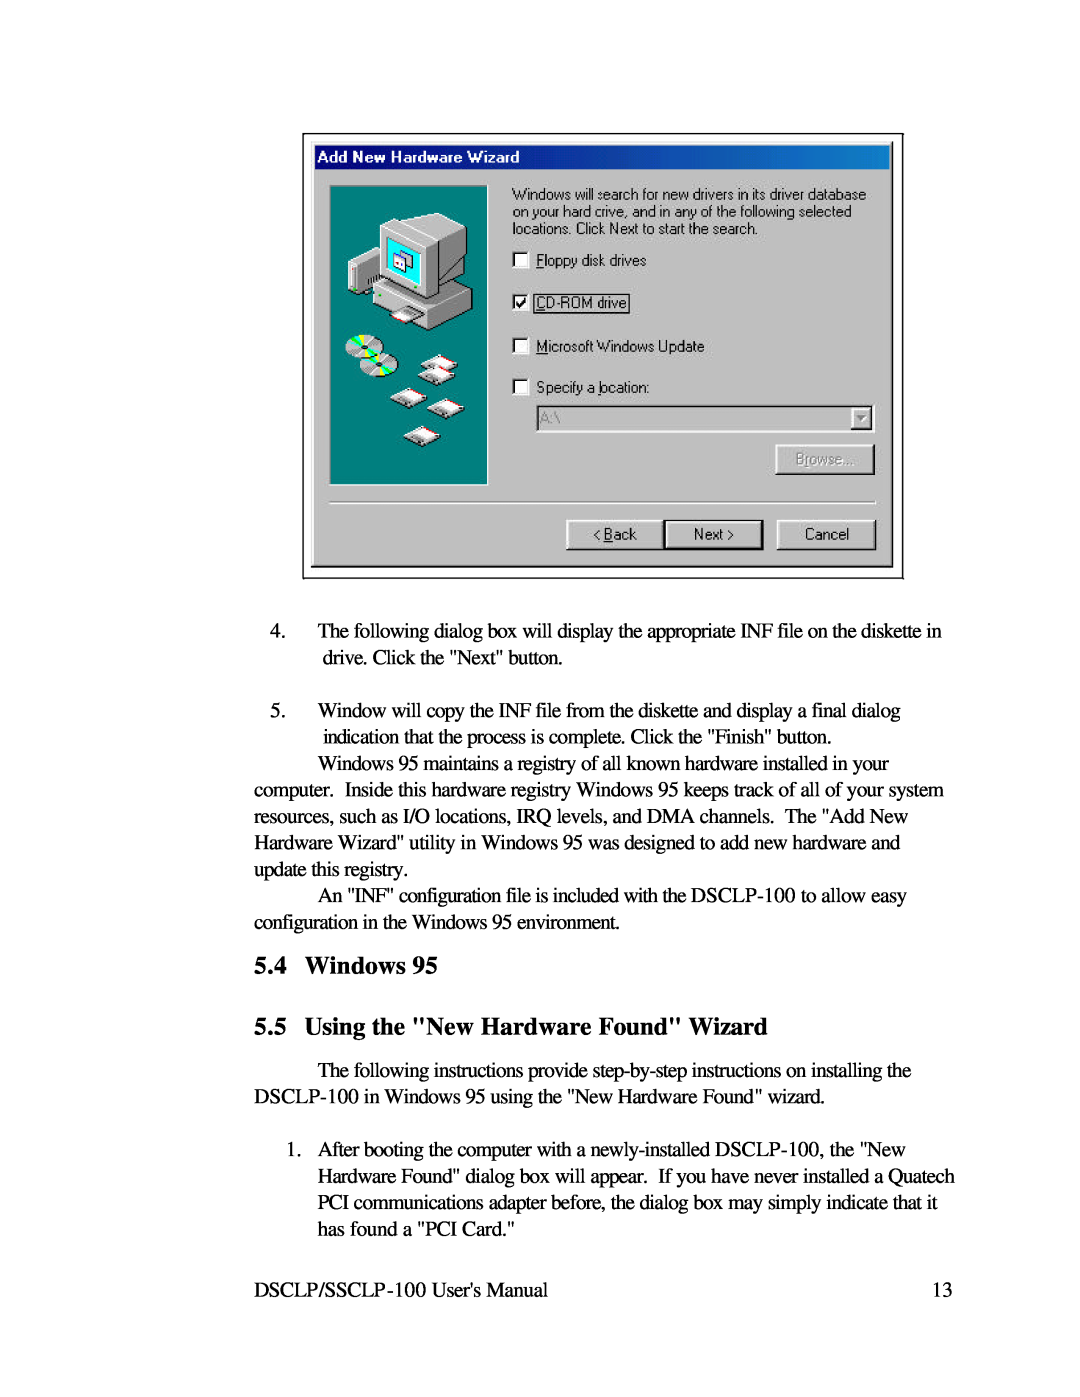 Quatech DSCLP-100 user manual Windows 5.5 Using the New Hardware Found Wizard 